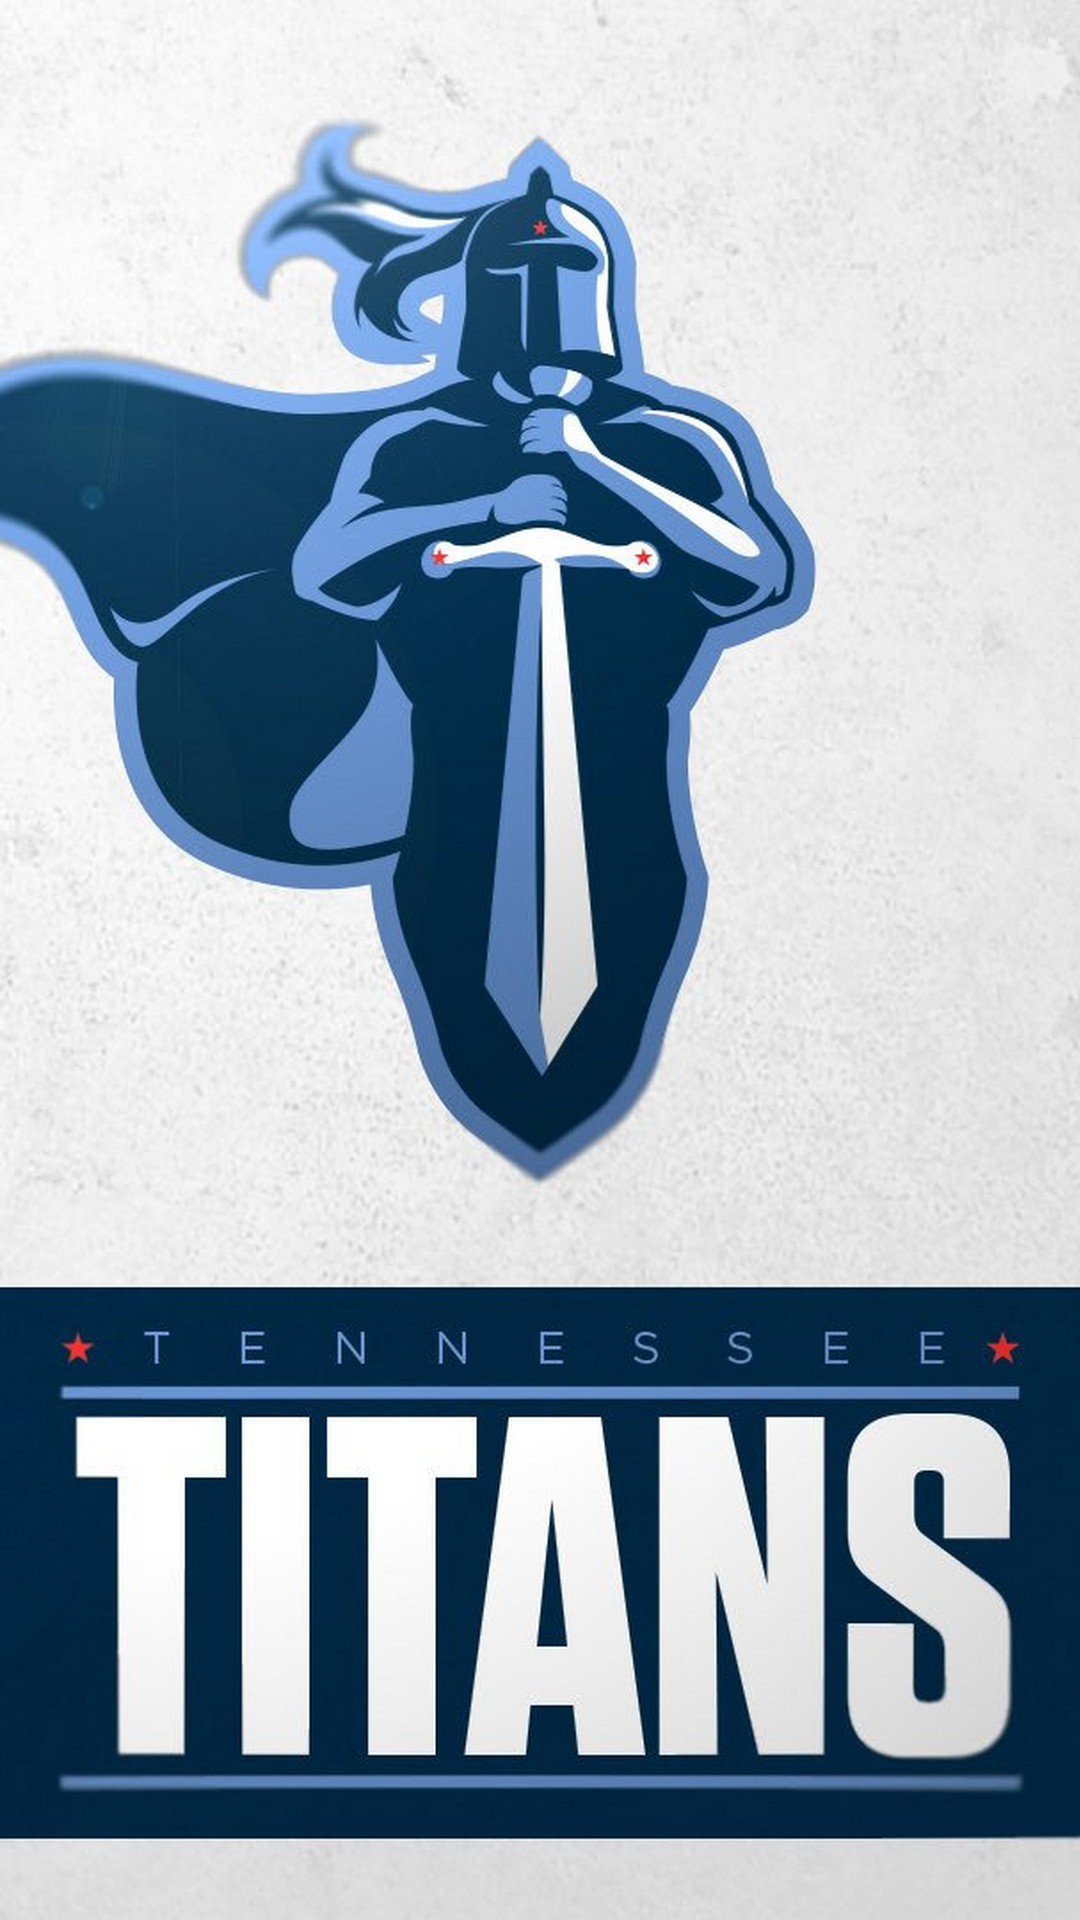 Tennessee Titans Mobile Wallpapers With high-resolution 1080X1920 pixel. You can use this wallpaper for your Mac or Windows Desktop Background, iPhone, Android or Tablet and another Smartphone device